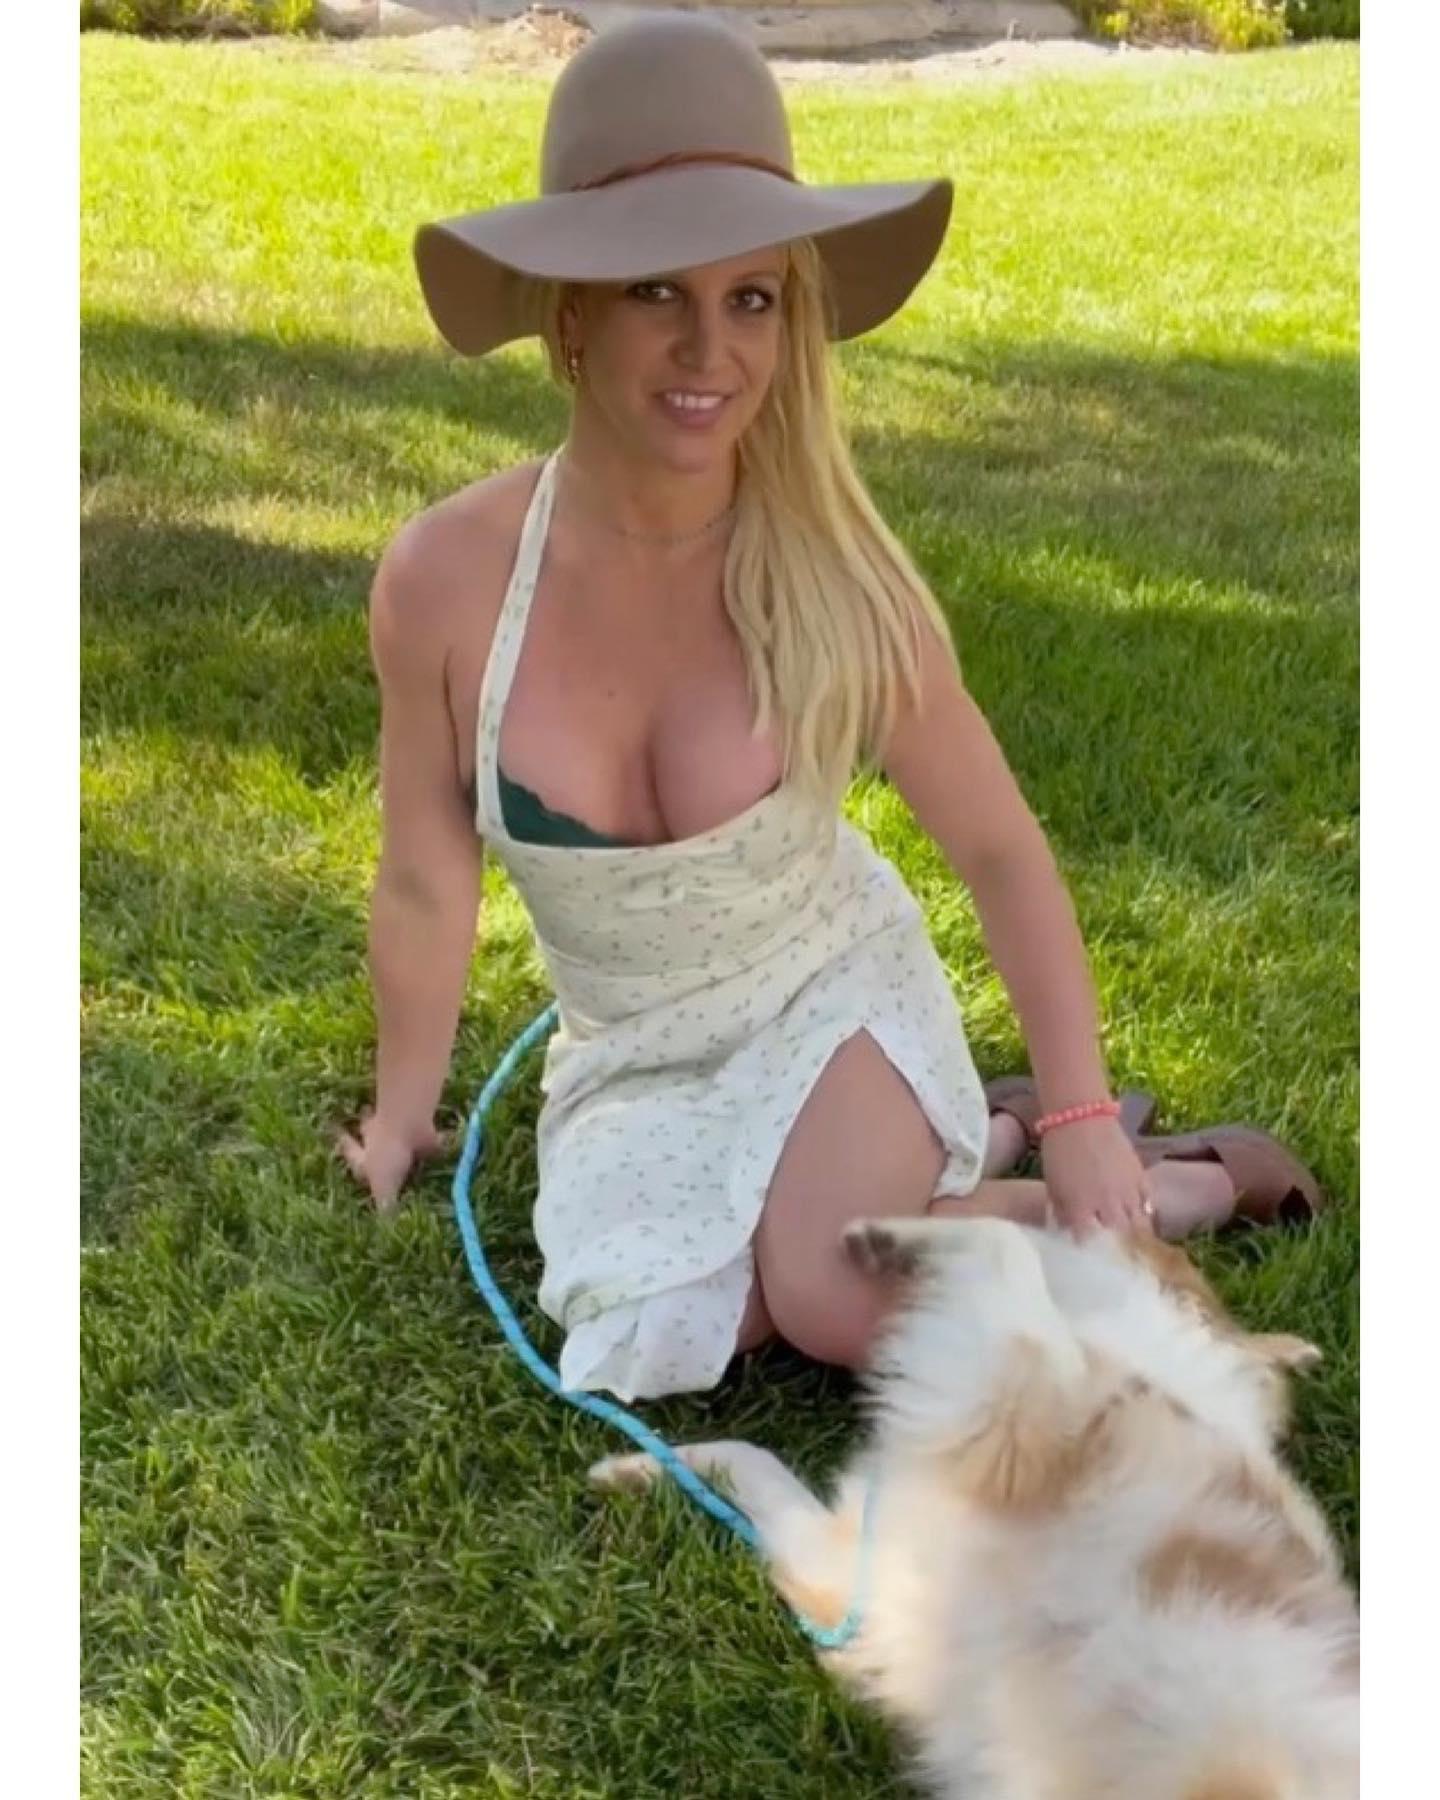 Britney Spears shares a throwback with her dog Sawyer